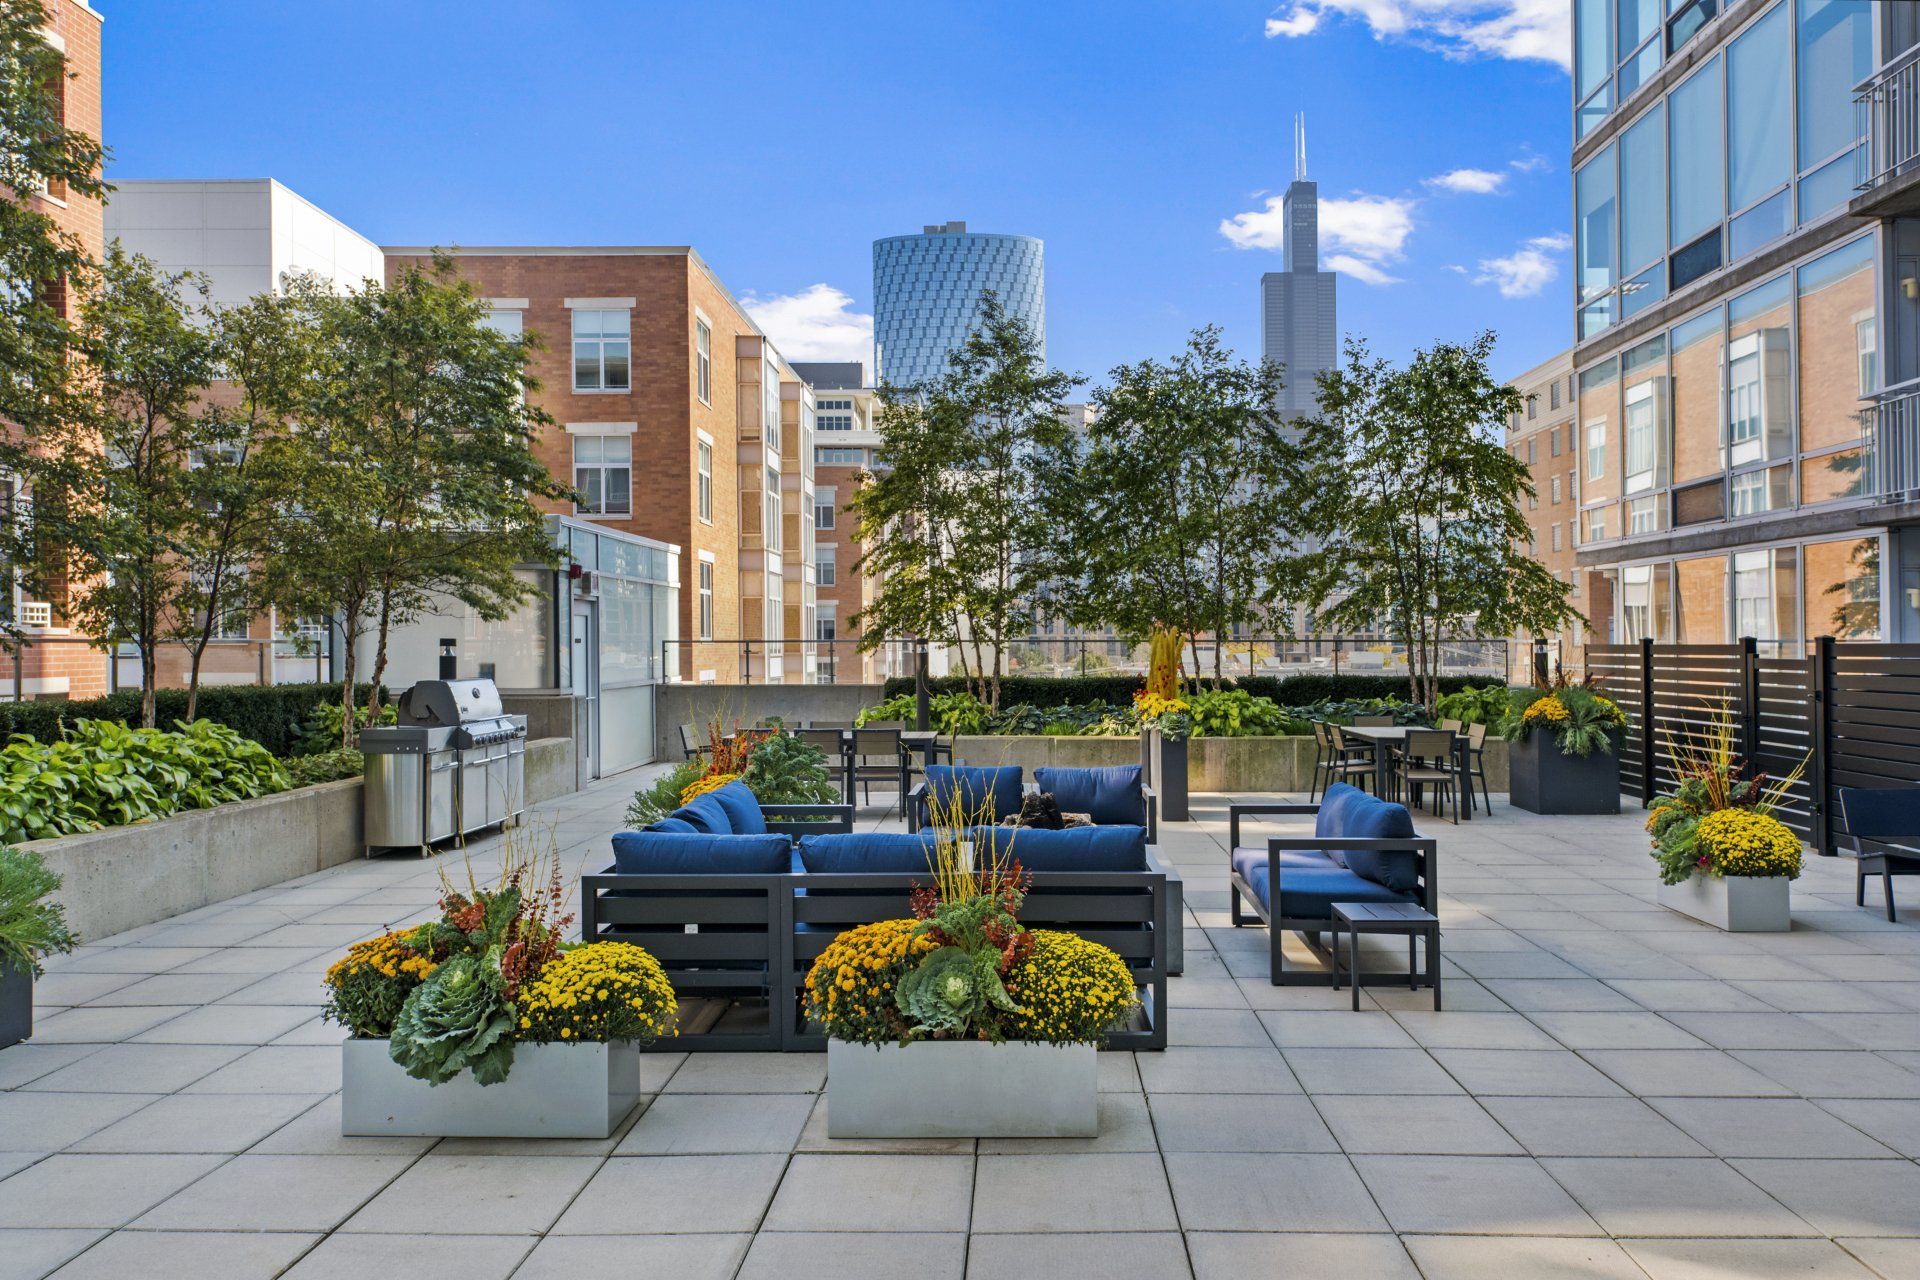 A patio with furniture and flowers in front of a building at 24 S Morgan Apartments.